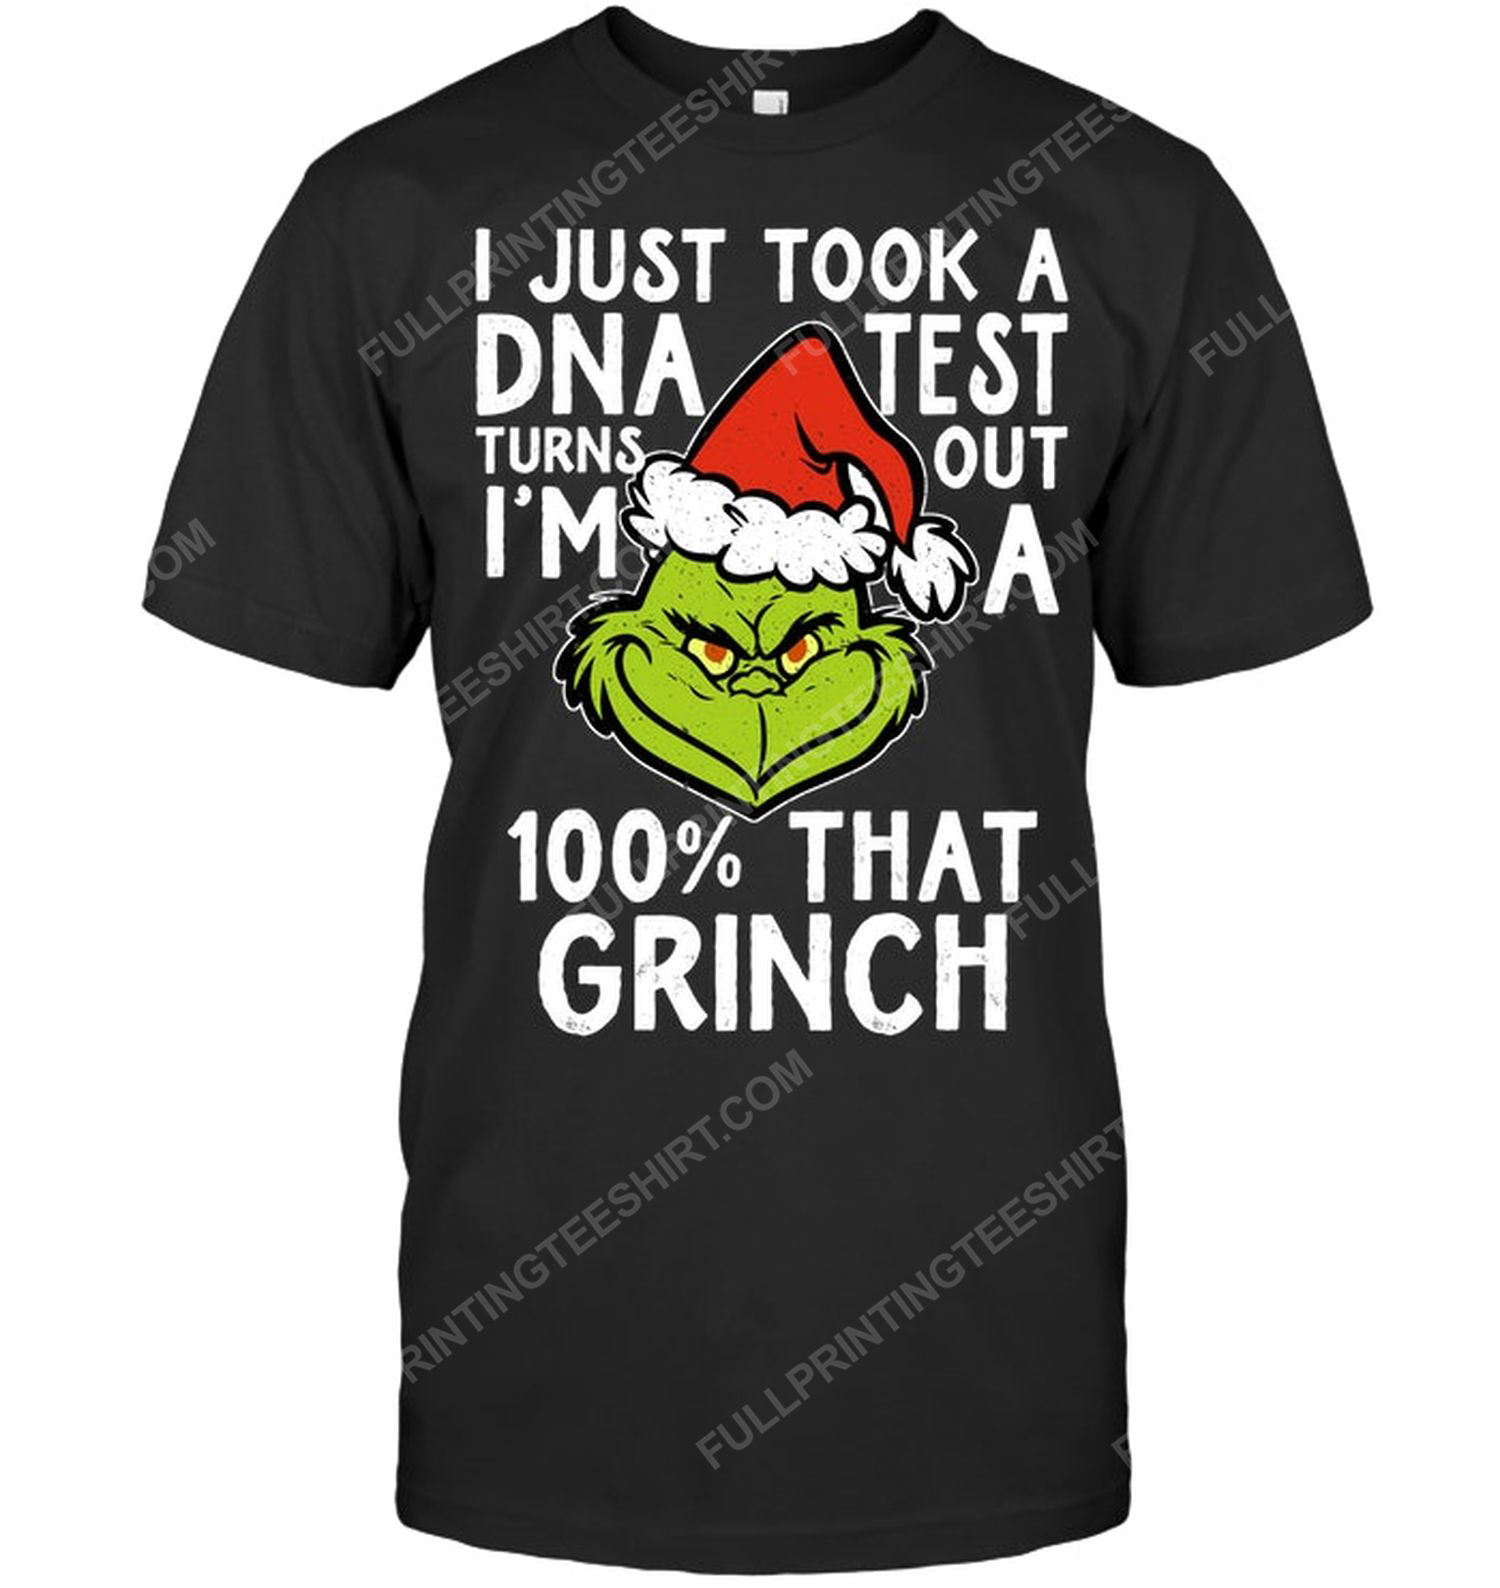 I just took a dna test turns out i'm 100 that grinch tshirt